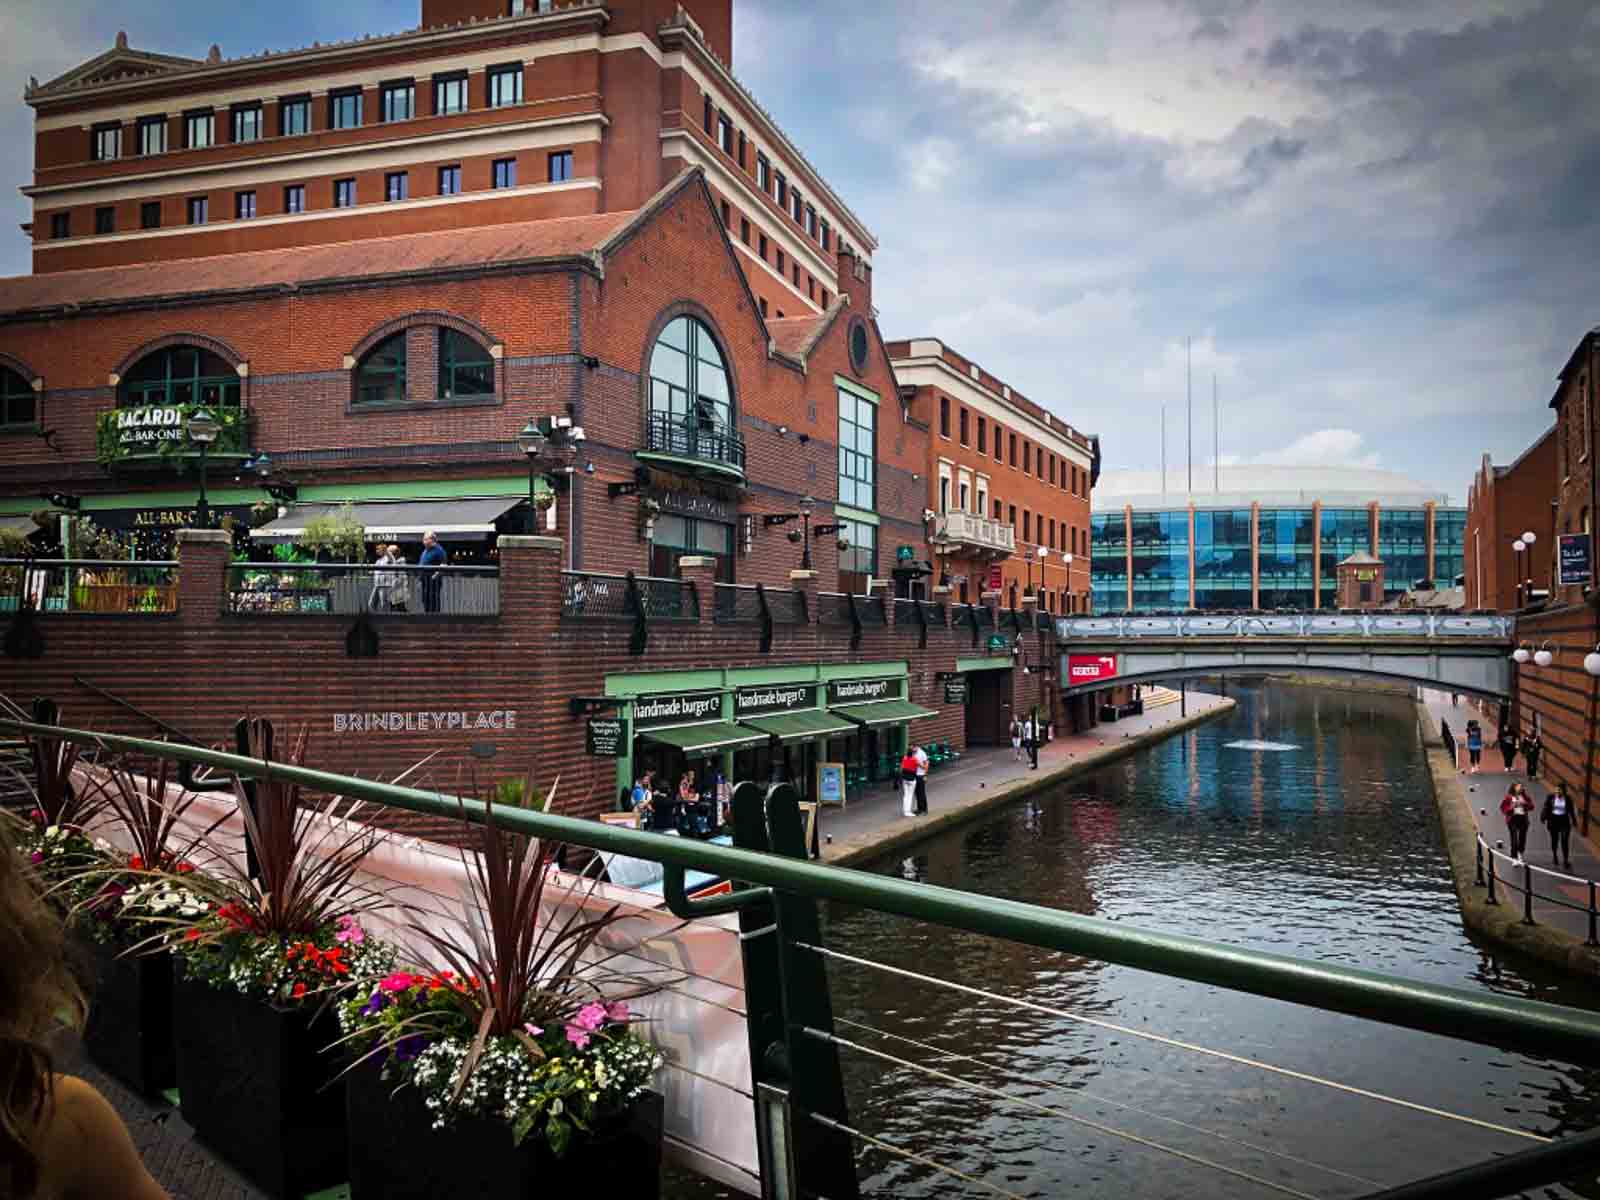 brindley place in Birmingham seen from a canal bridge